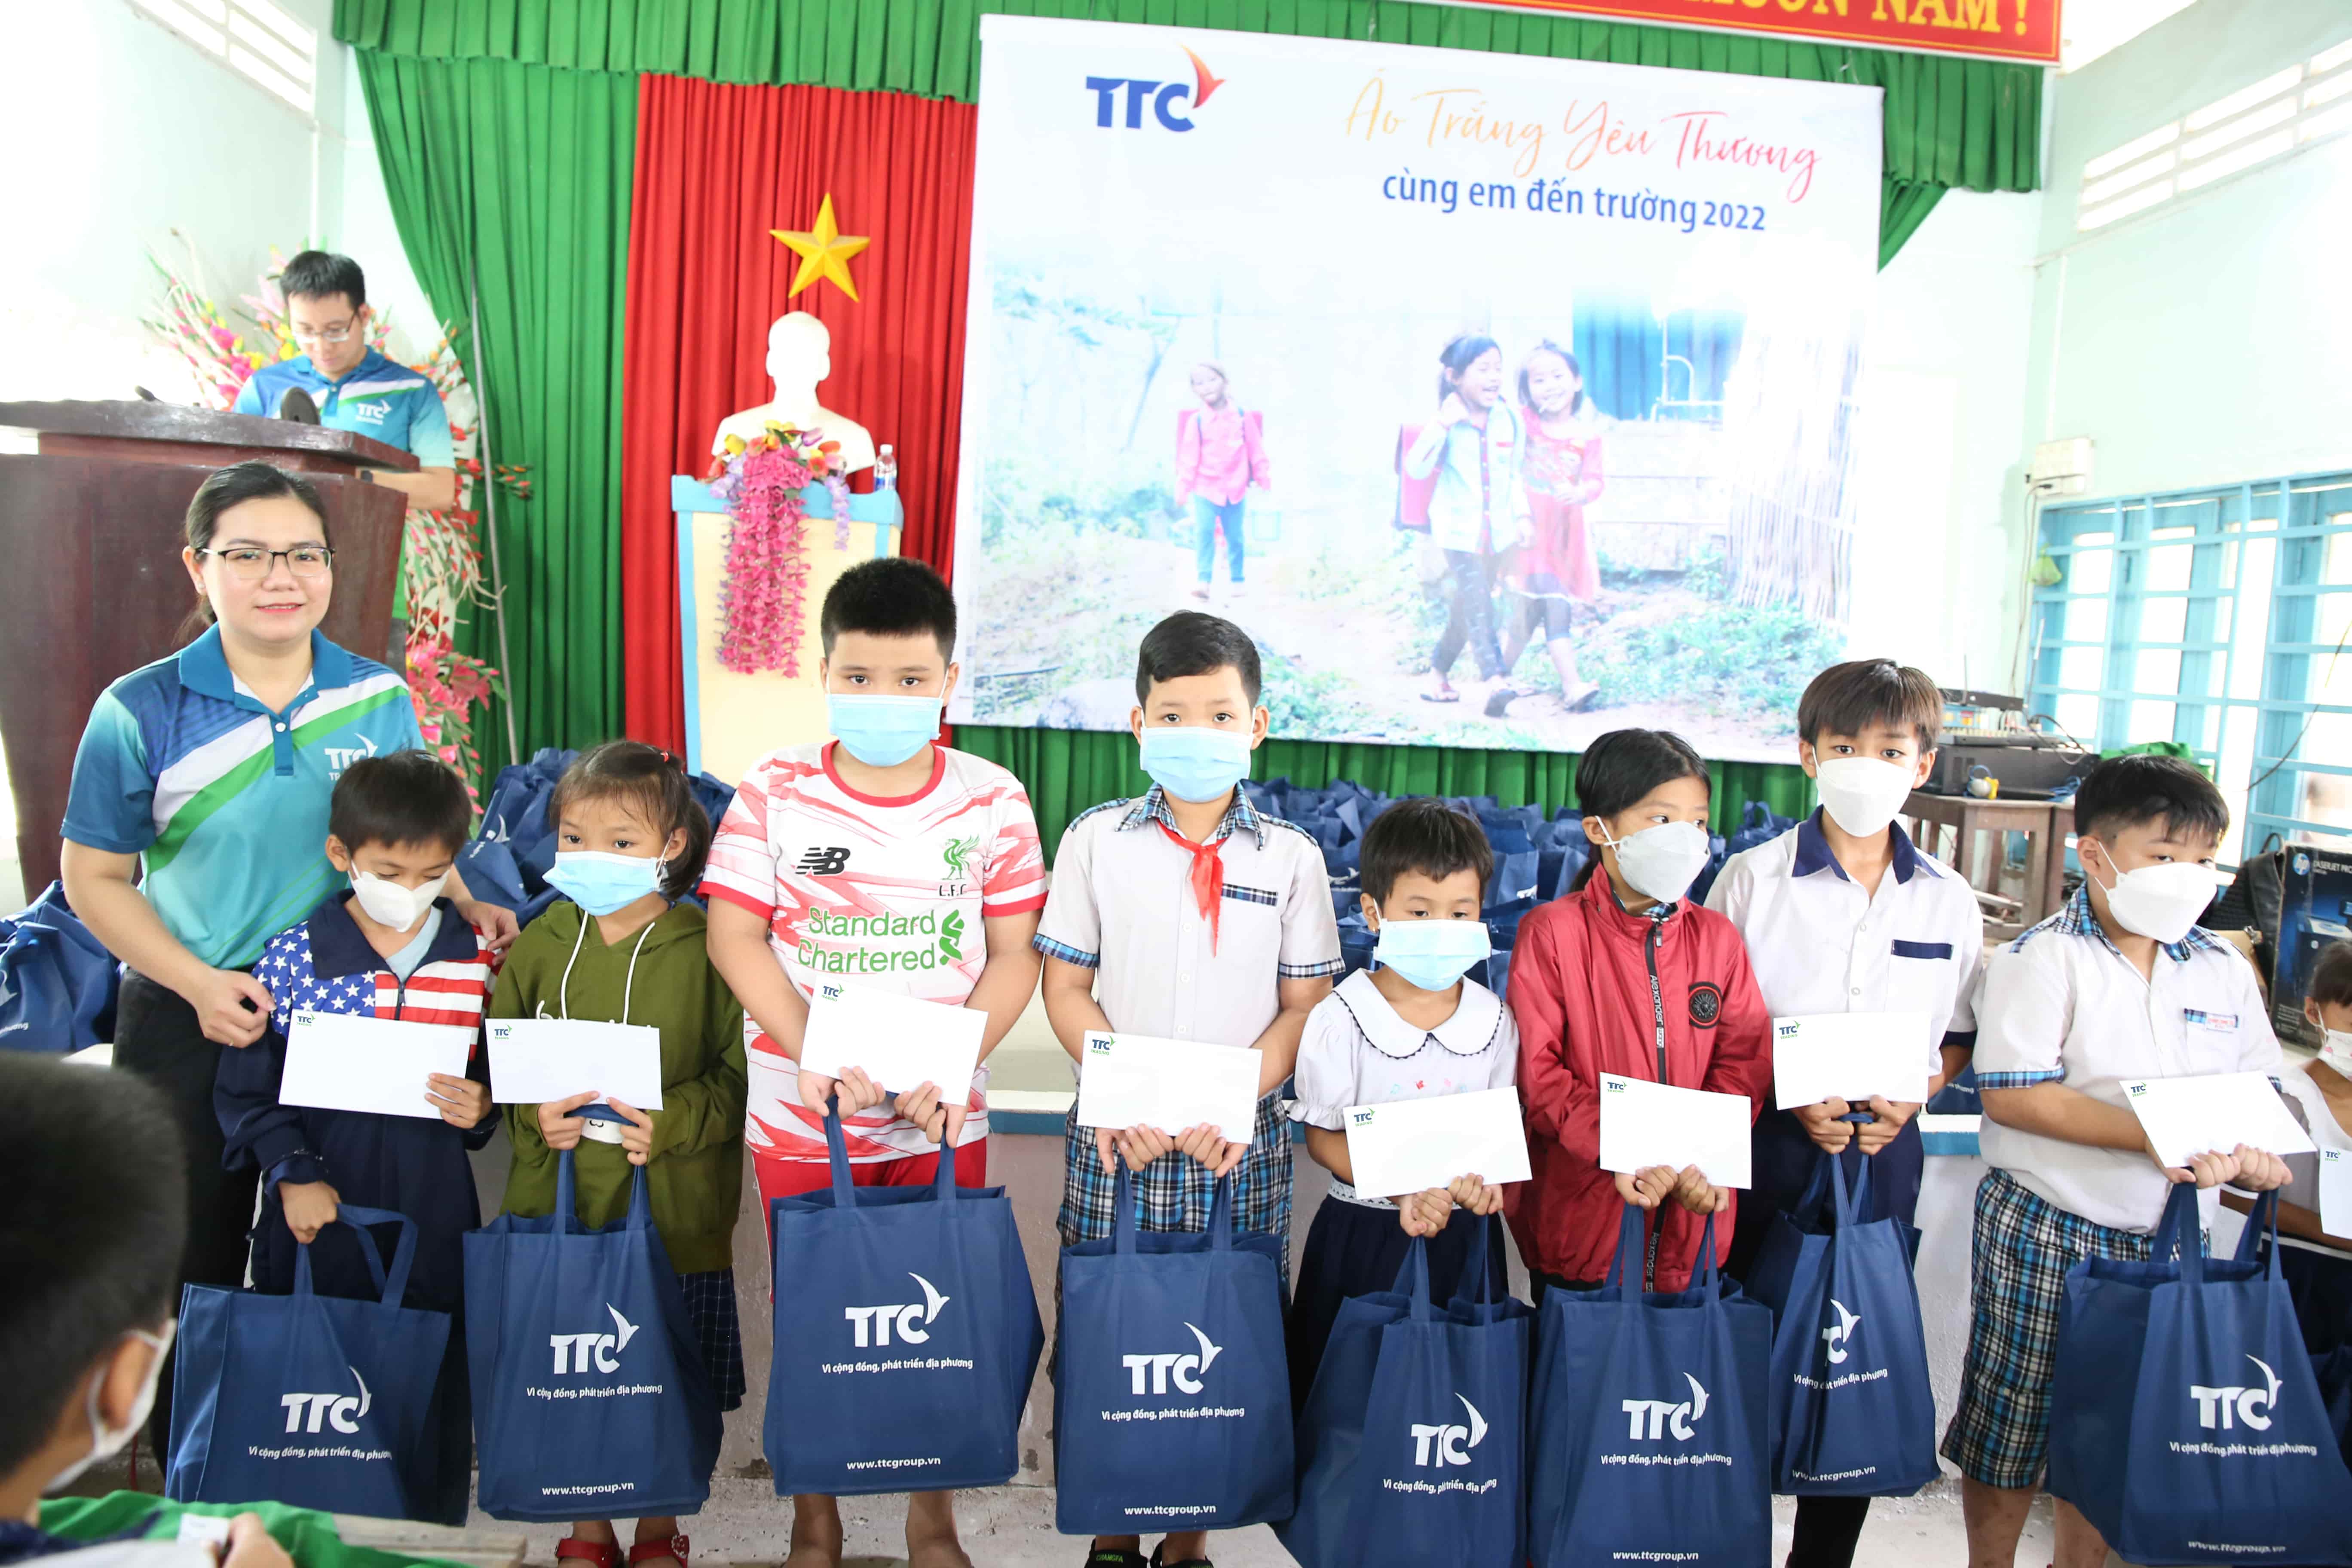 Let's look back at the pictures of the program "Ao trang yeu thuong cung em den truong" in 2022